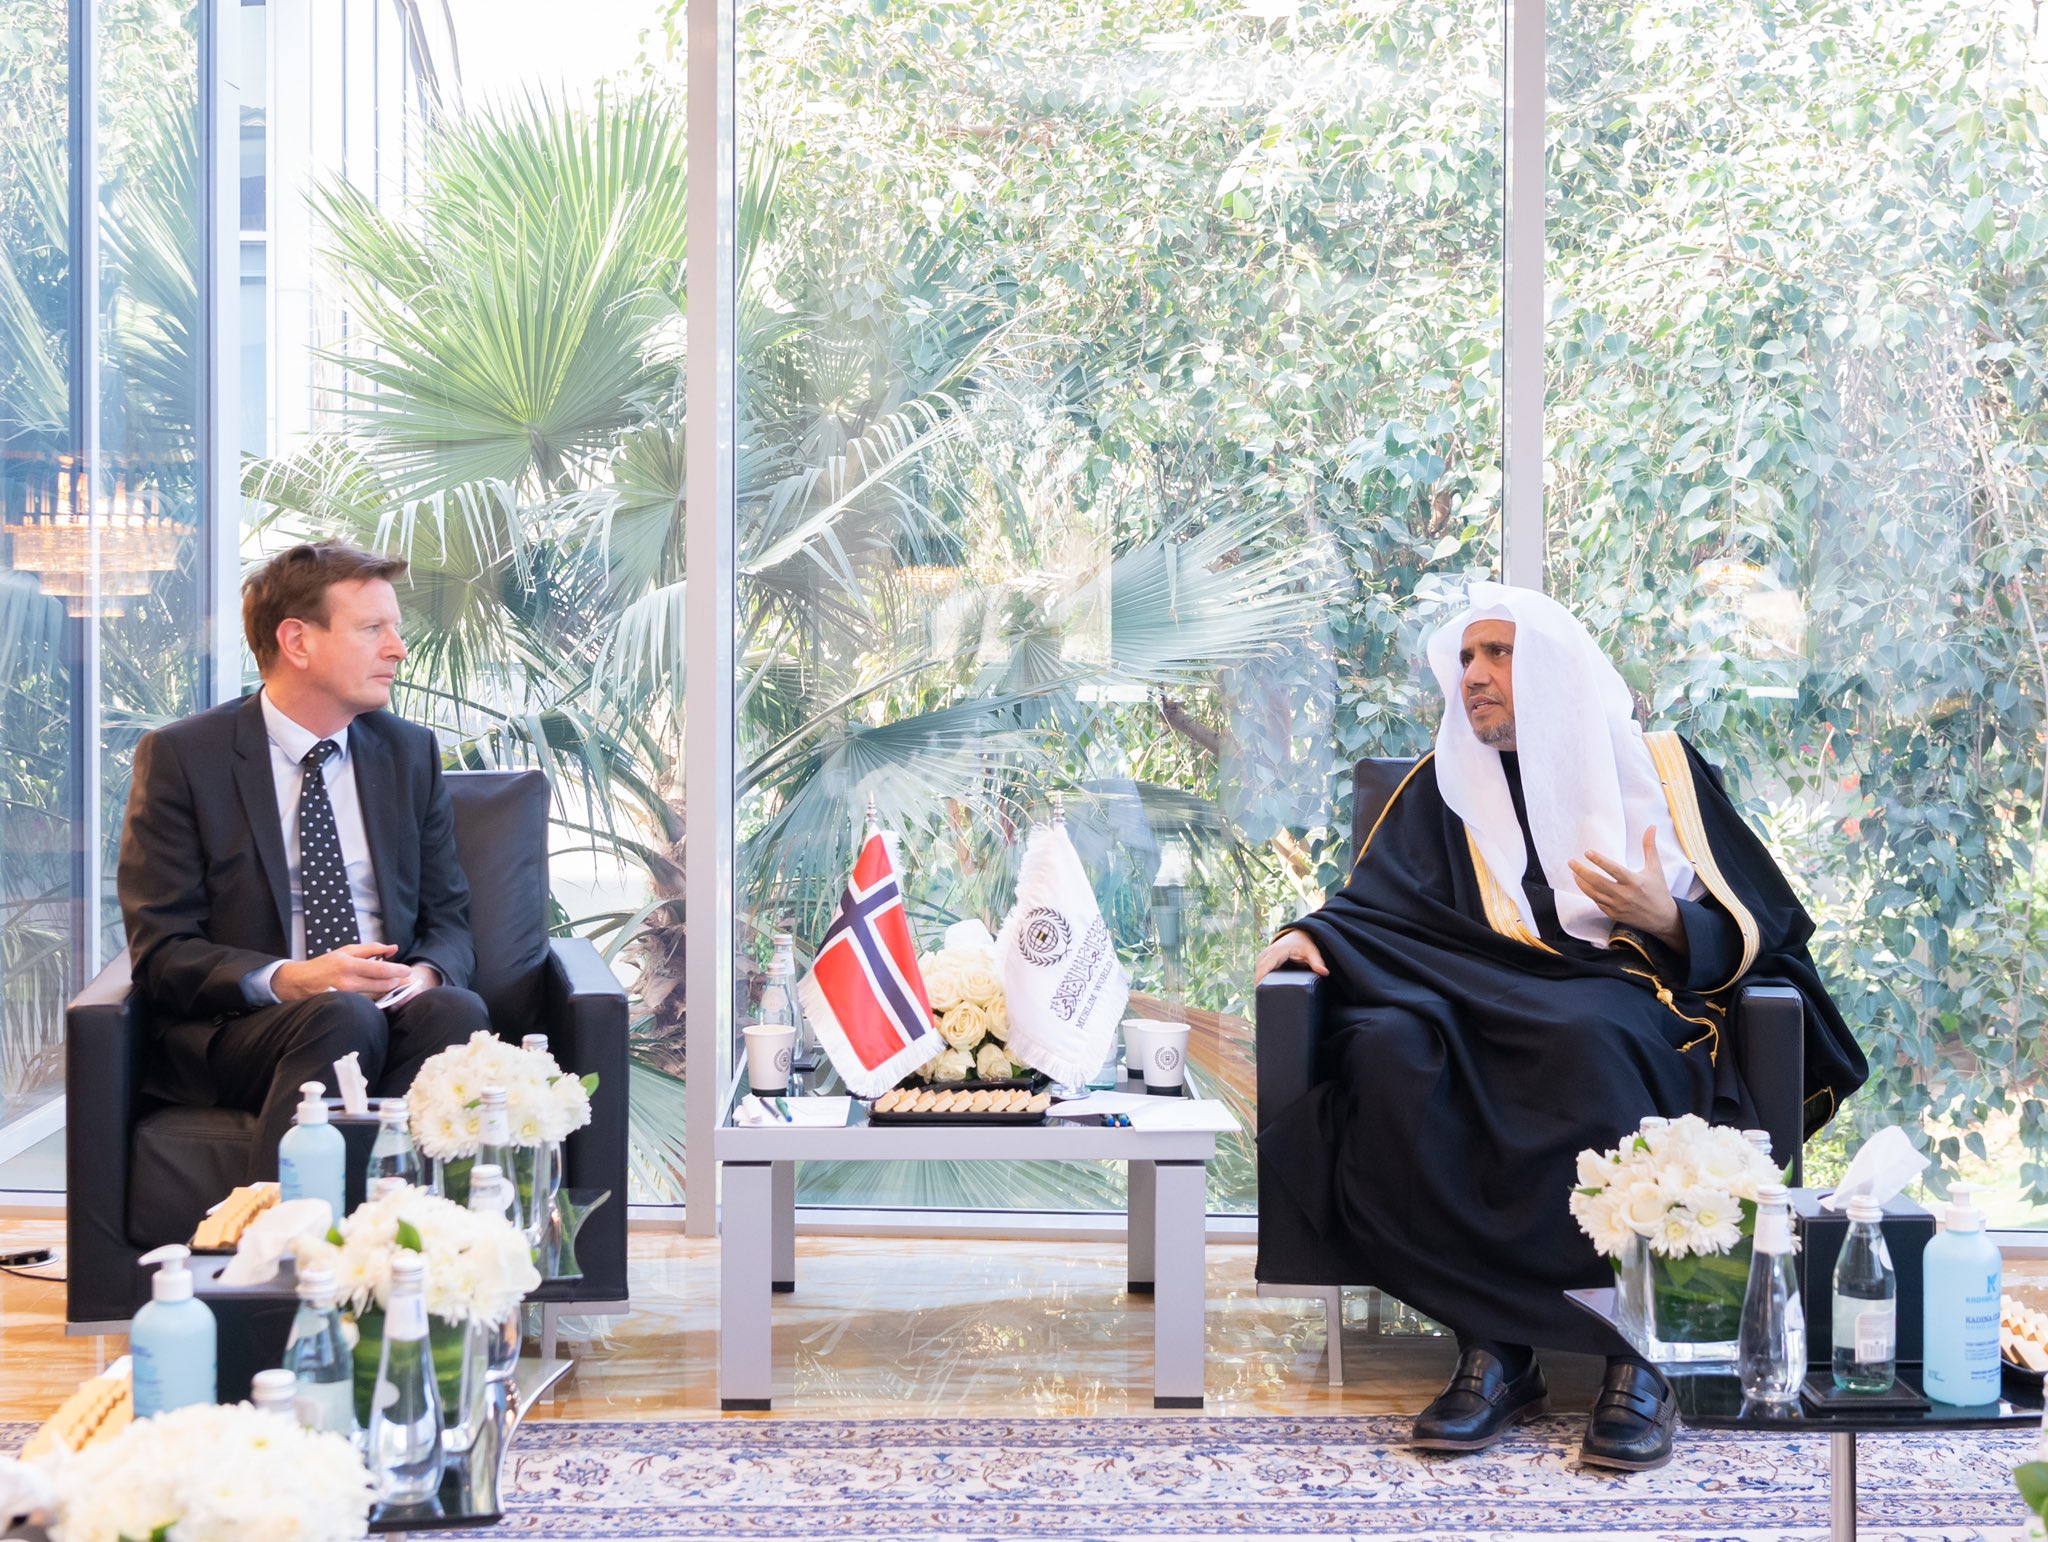 His Excellency Dr. Mohammad Alissa received the Ambassador of Norway to the Kingdom of Saudi Arabia, Mr. Thomas Lid Ball